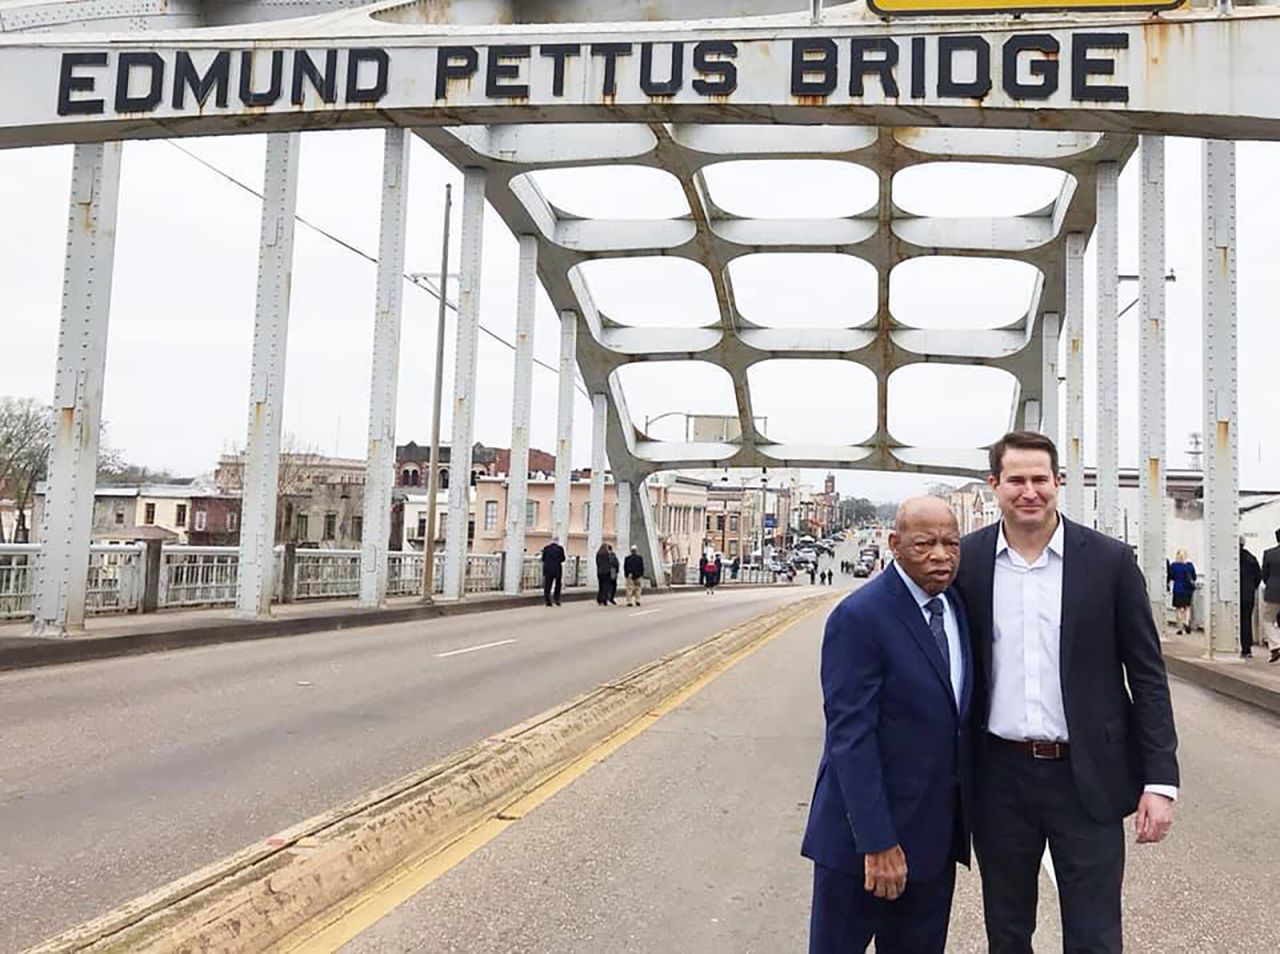 Moulton poses with US Rep. John Lewis, a civil rights icon, in Selma, Alabama, in March 2019. "After 54 years, John Lewis is still walking across Edmund Pettus Bridge in the name of freedom and equality," <a href="https://www.facebook.com/SethMoulton/photos/a.367186863420256/1320631628075770/?type=3&theater" target="_blank" target="_blank">Moulton said on Facebook.</a> "Today I was proud to walk with him."